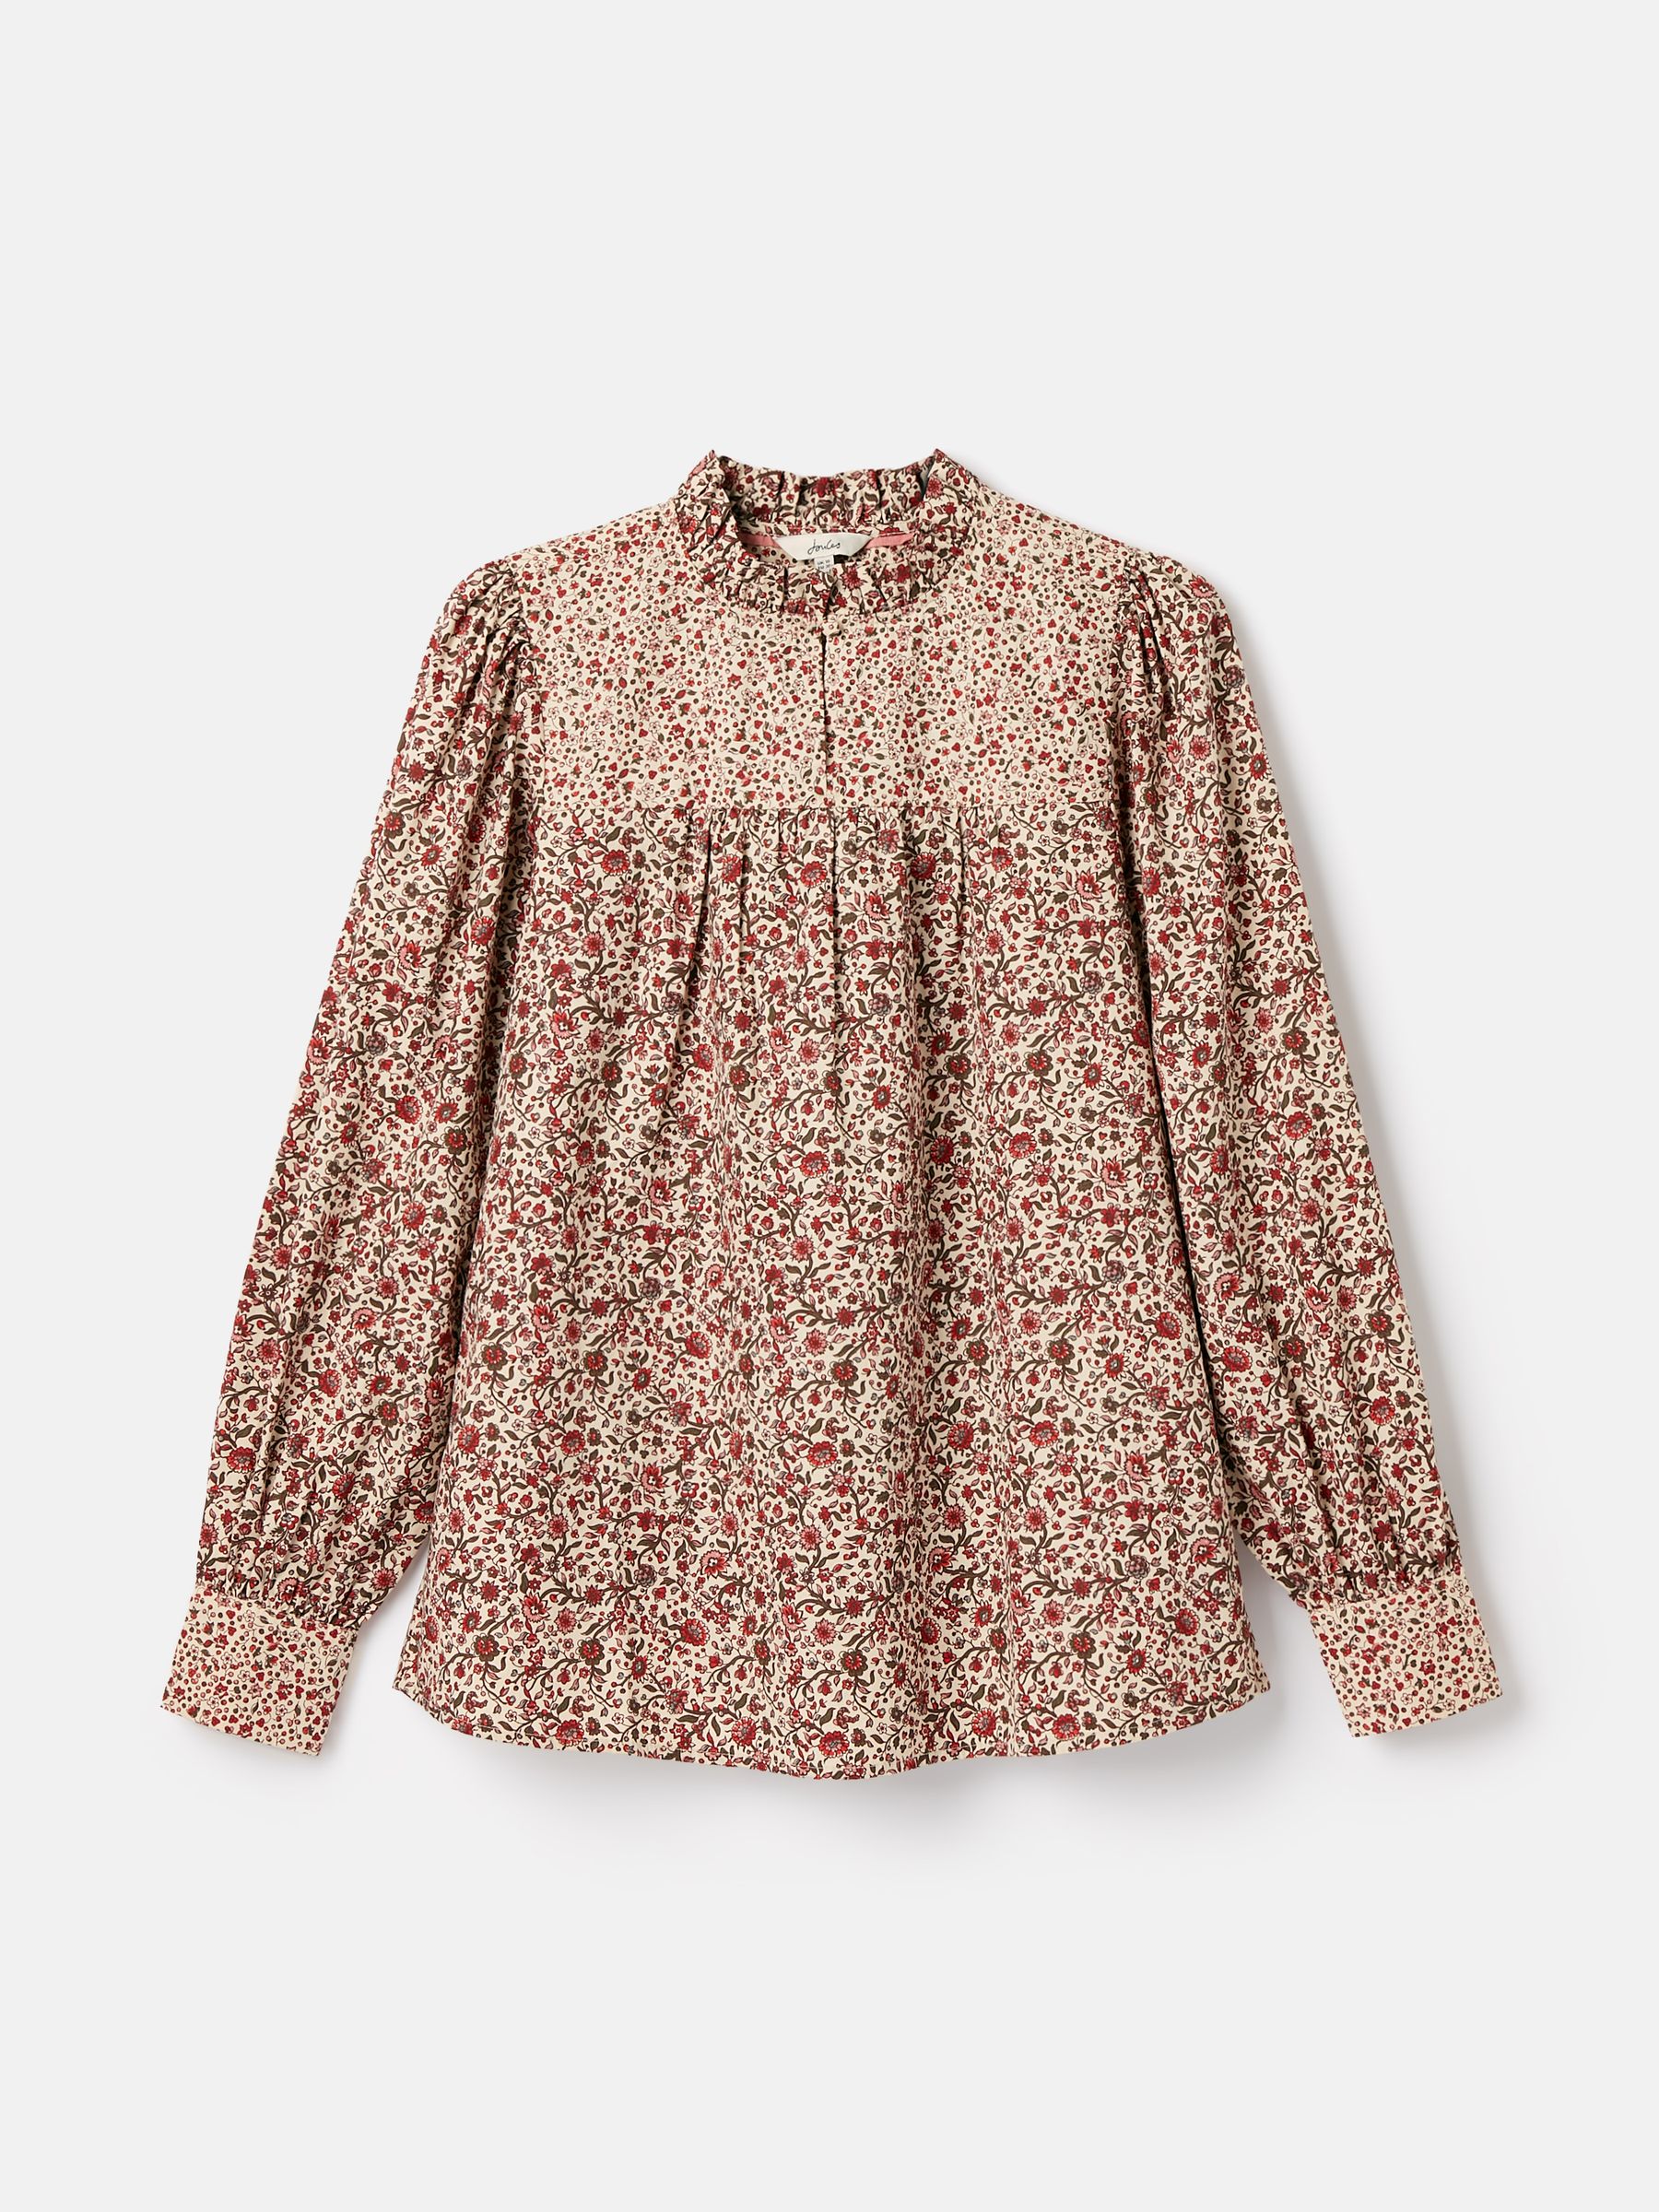 Buy Joules Rhea Long Sleeve Blouse with Frill Neck from the Joules ...